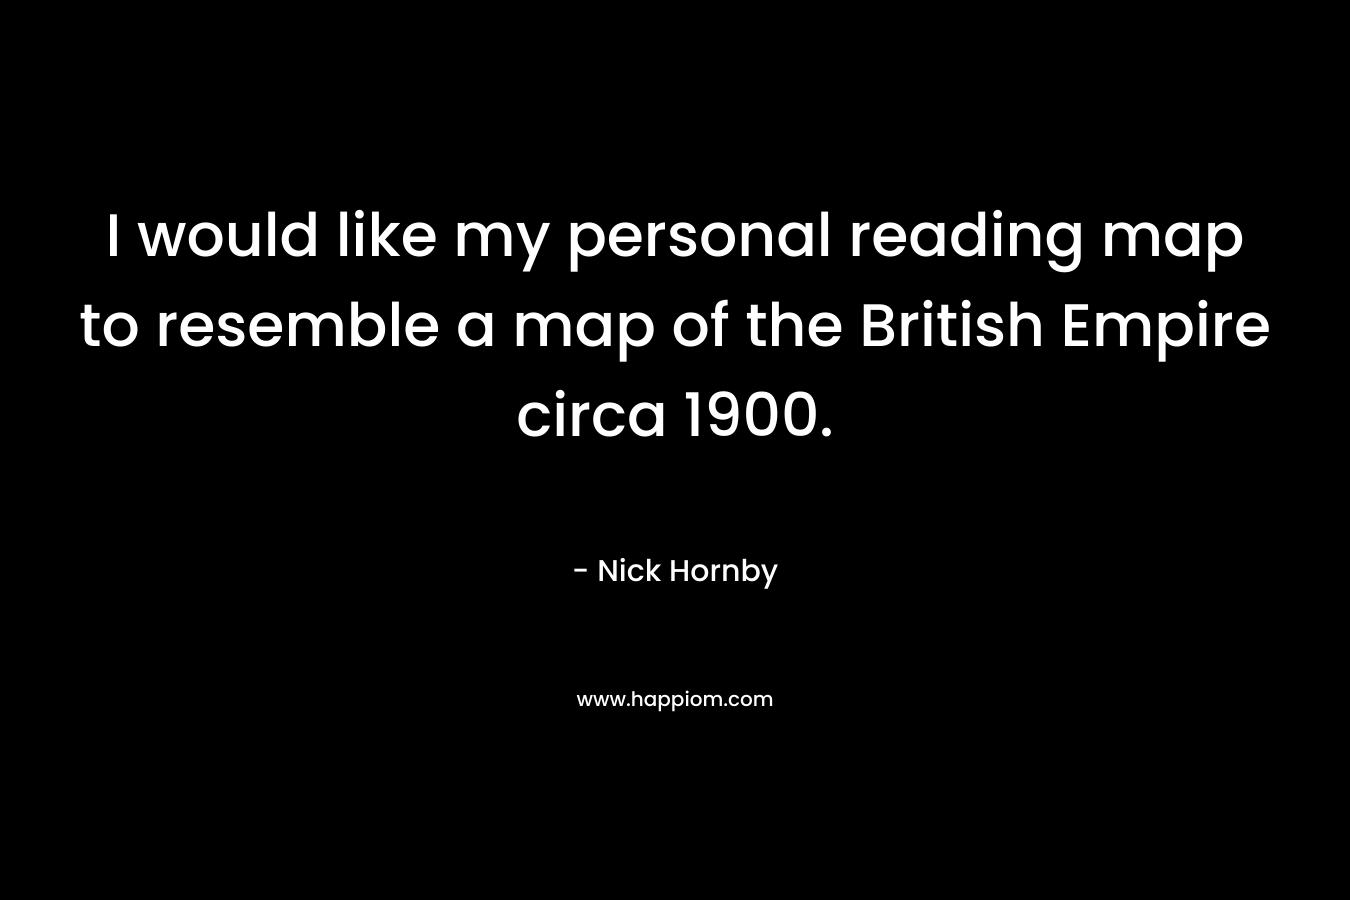 I would like my personal reading map to resemble a map of the British Empire circa 1900. – Nick Hornby